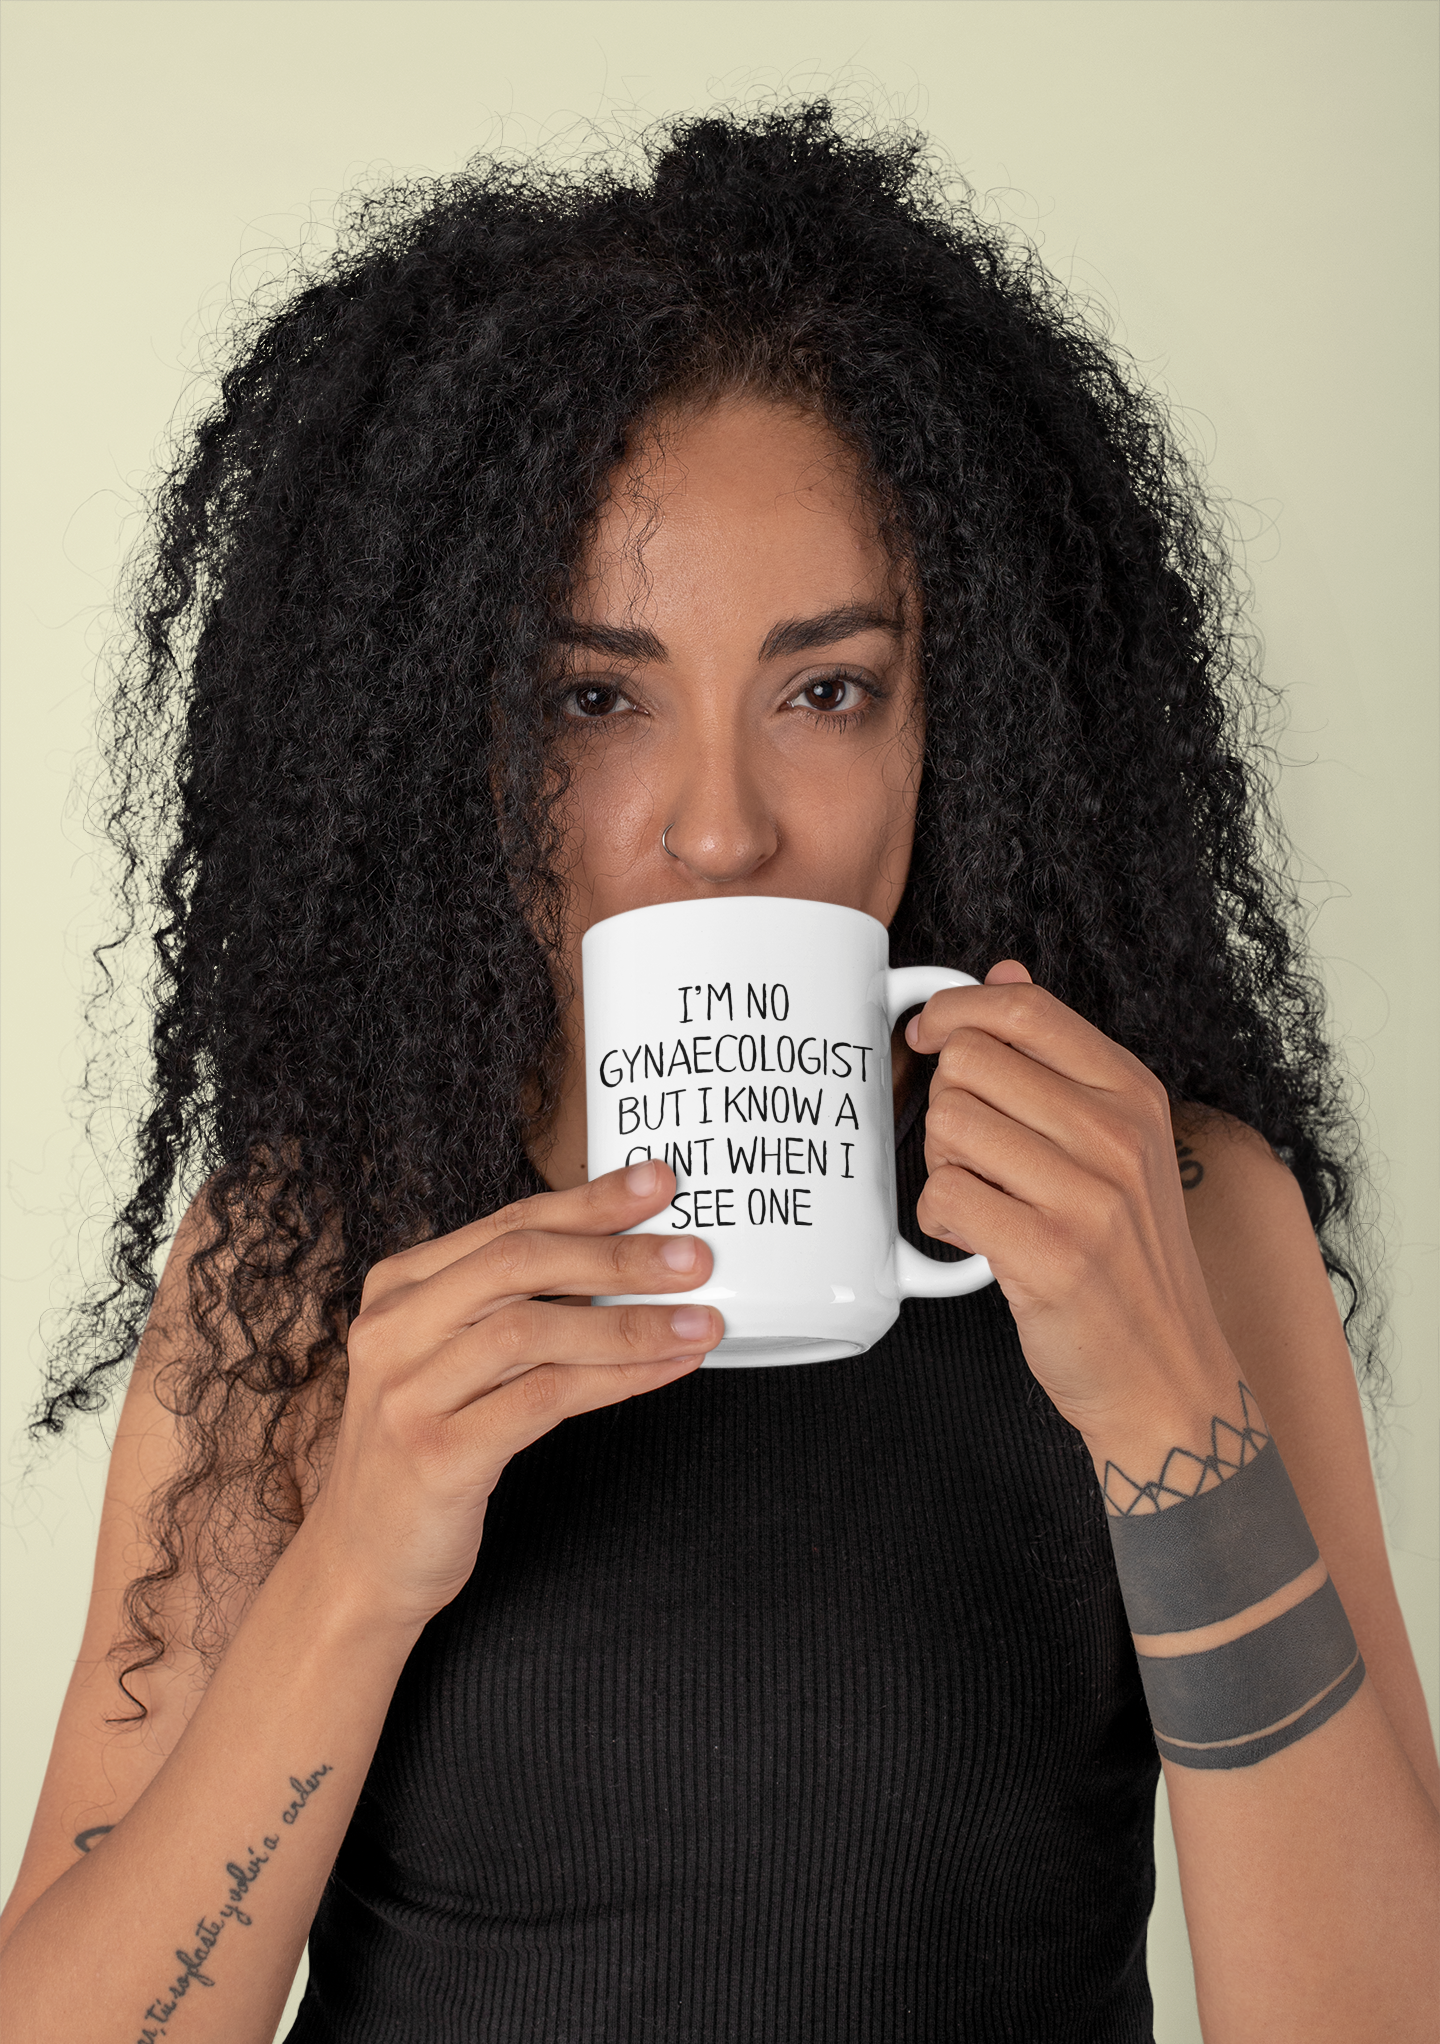 White mug featuring the funny quote i'm no gynaecologist but i know a c*nt when i see one. Printed in black ink.